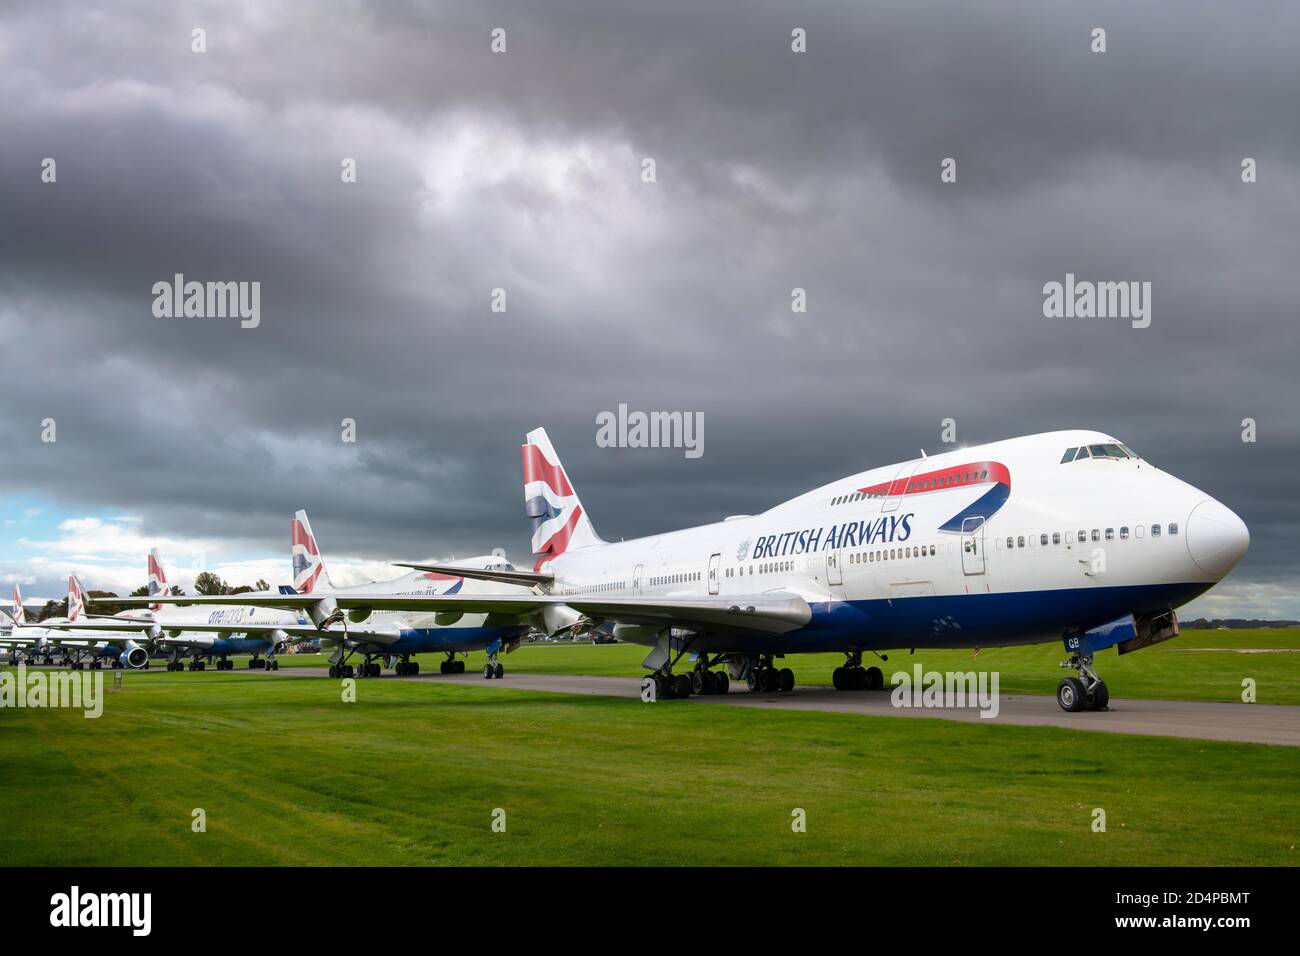 Saturday 10th October 2020. Storm clouds gather over the final resting place of the iconic British Airways Boeing 747 'Jumbo Jet' fleet as they wait on the tarmac to be scrapped at Cotswold Airport near Kemble in Gloucestershire. Credit: Terry Mathews/Alamy Live News Stock Photo